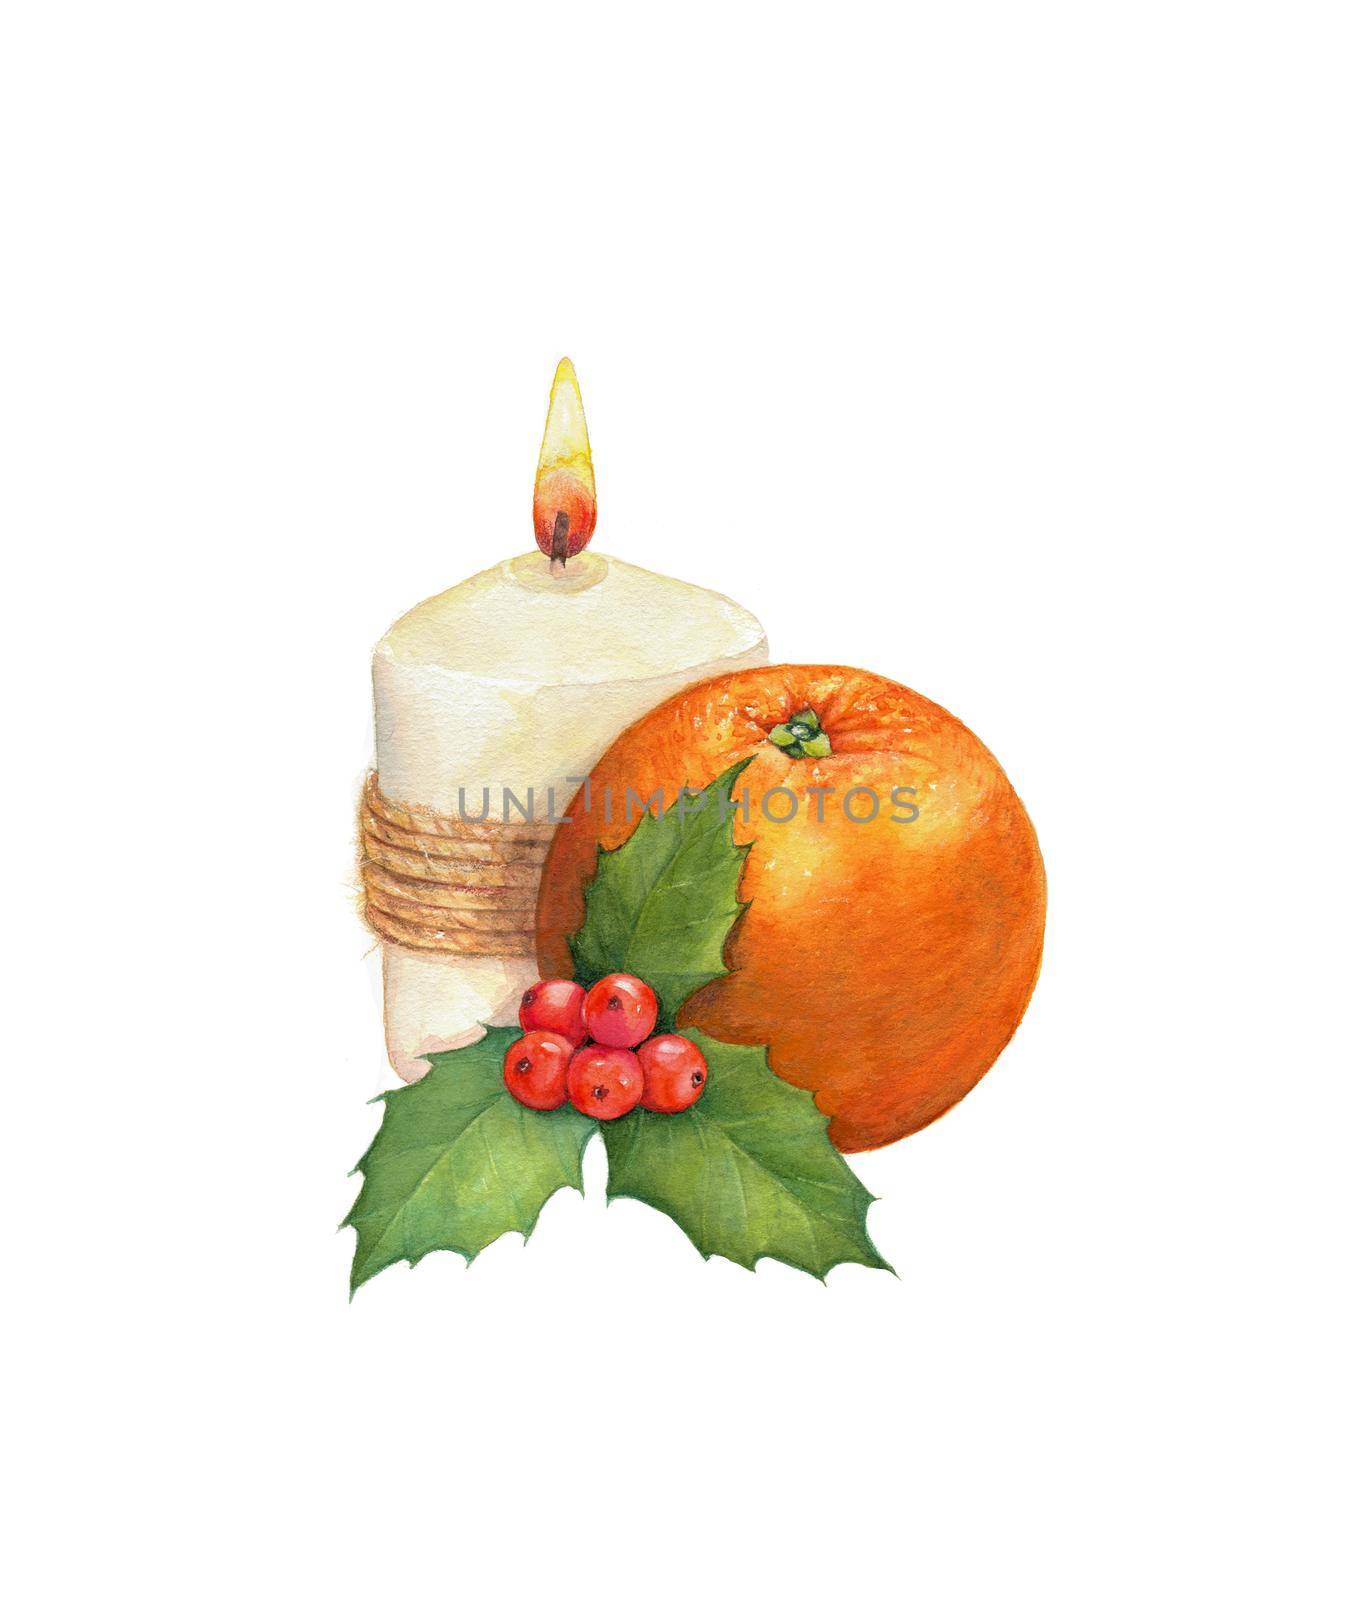 Christmas composition: candle, orange and a sprig of mistletoe. Can be used for printing greeting cards, book illustrations, etc. Christmas hand drawing watercolor illustration.